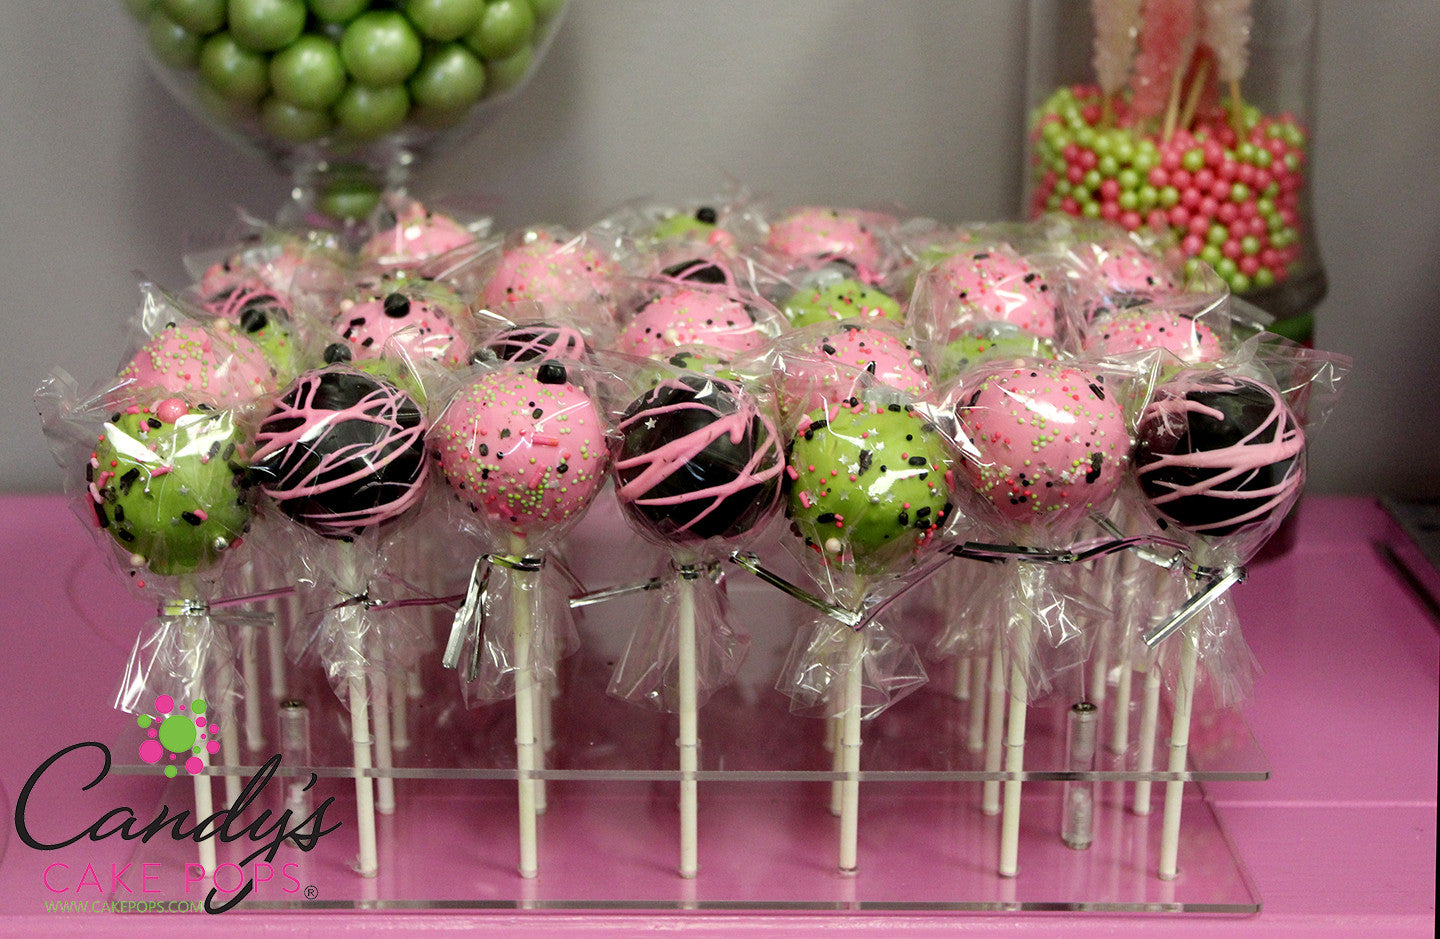 Acrylic Cake Pop Stand - Holds 42 Cake Pops (Cake Pops Not Included) - Candy's Cake Pops